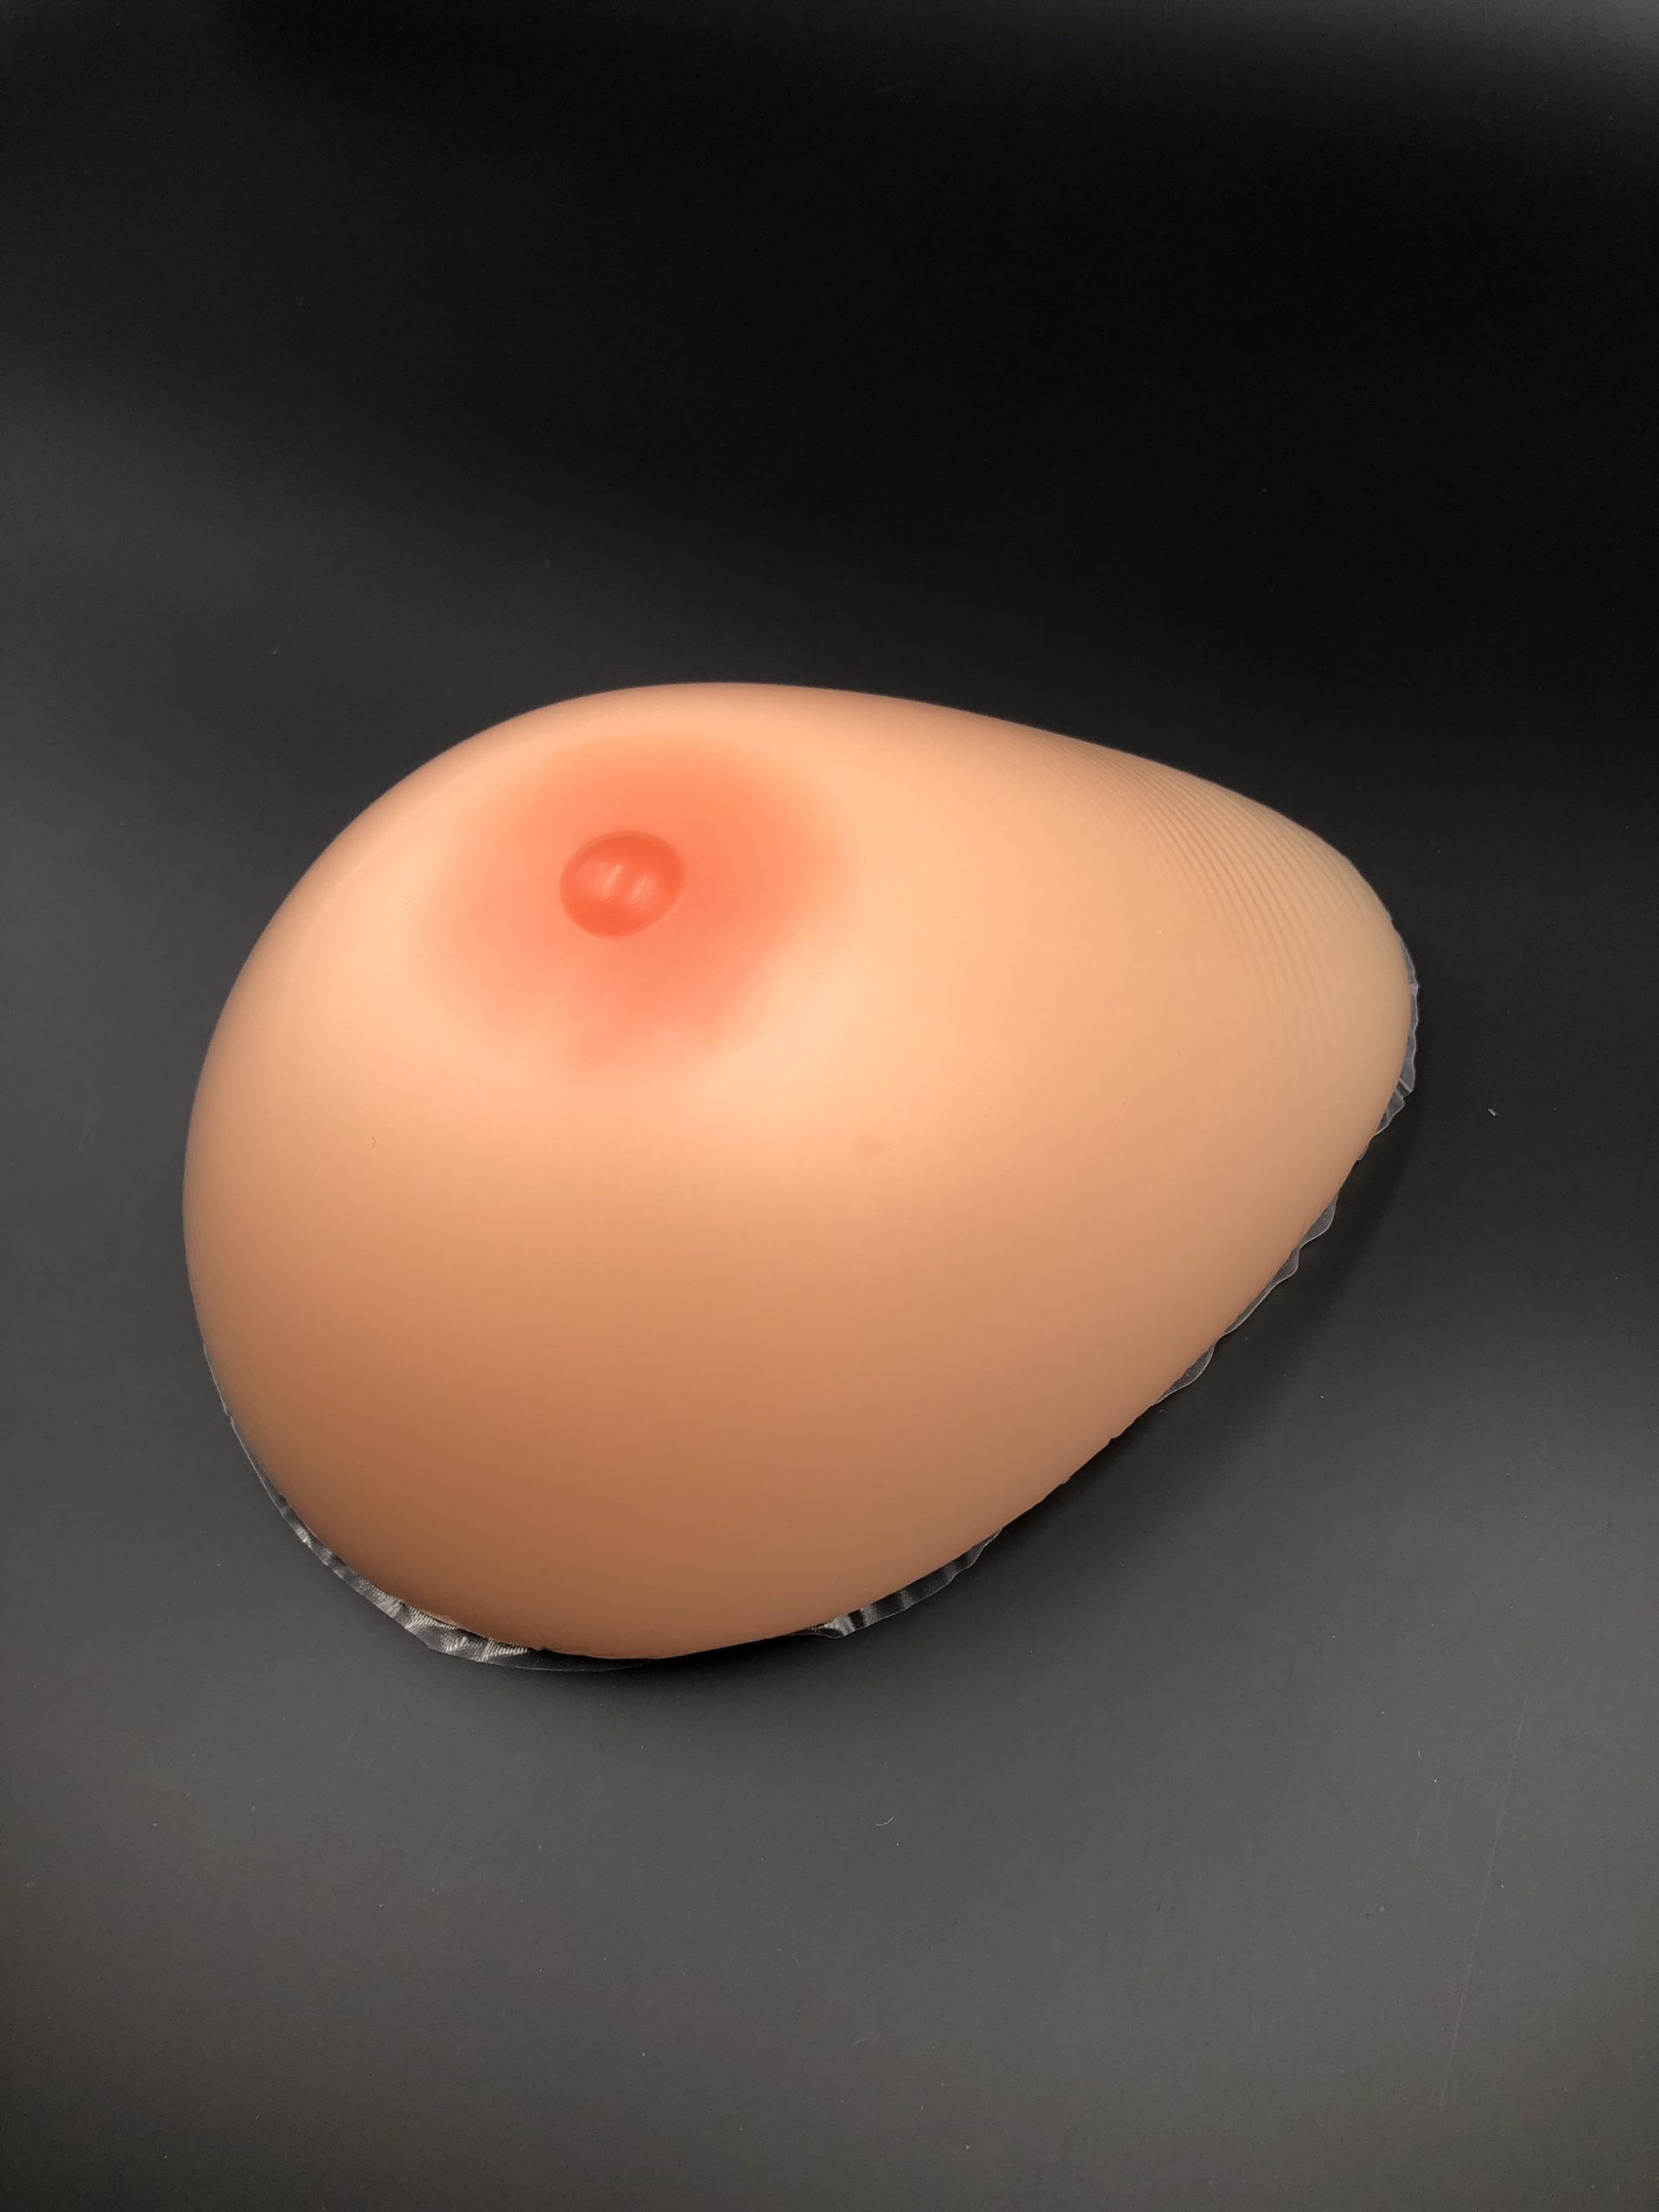 How To Attach Breast Forms